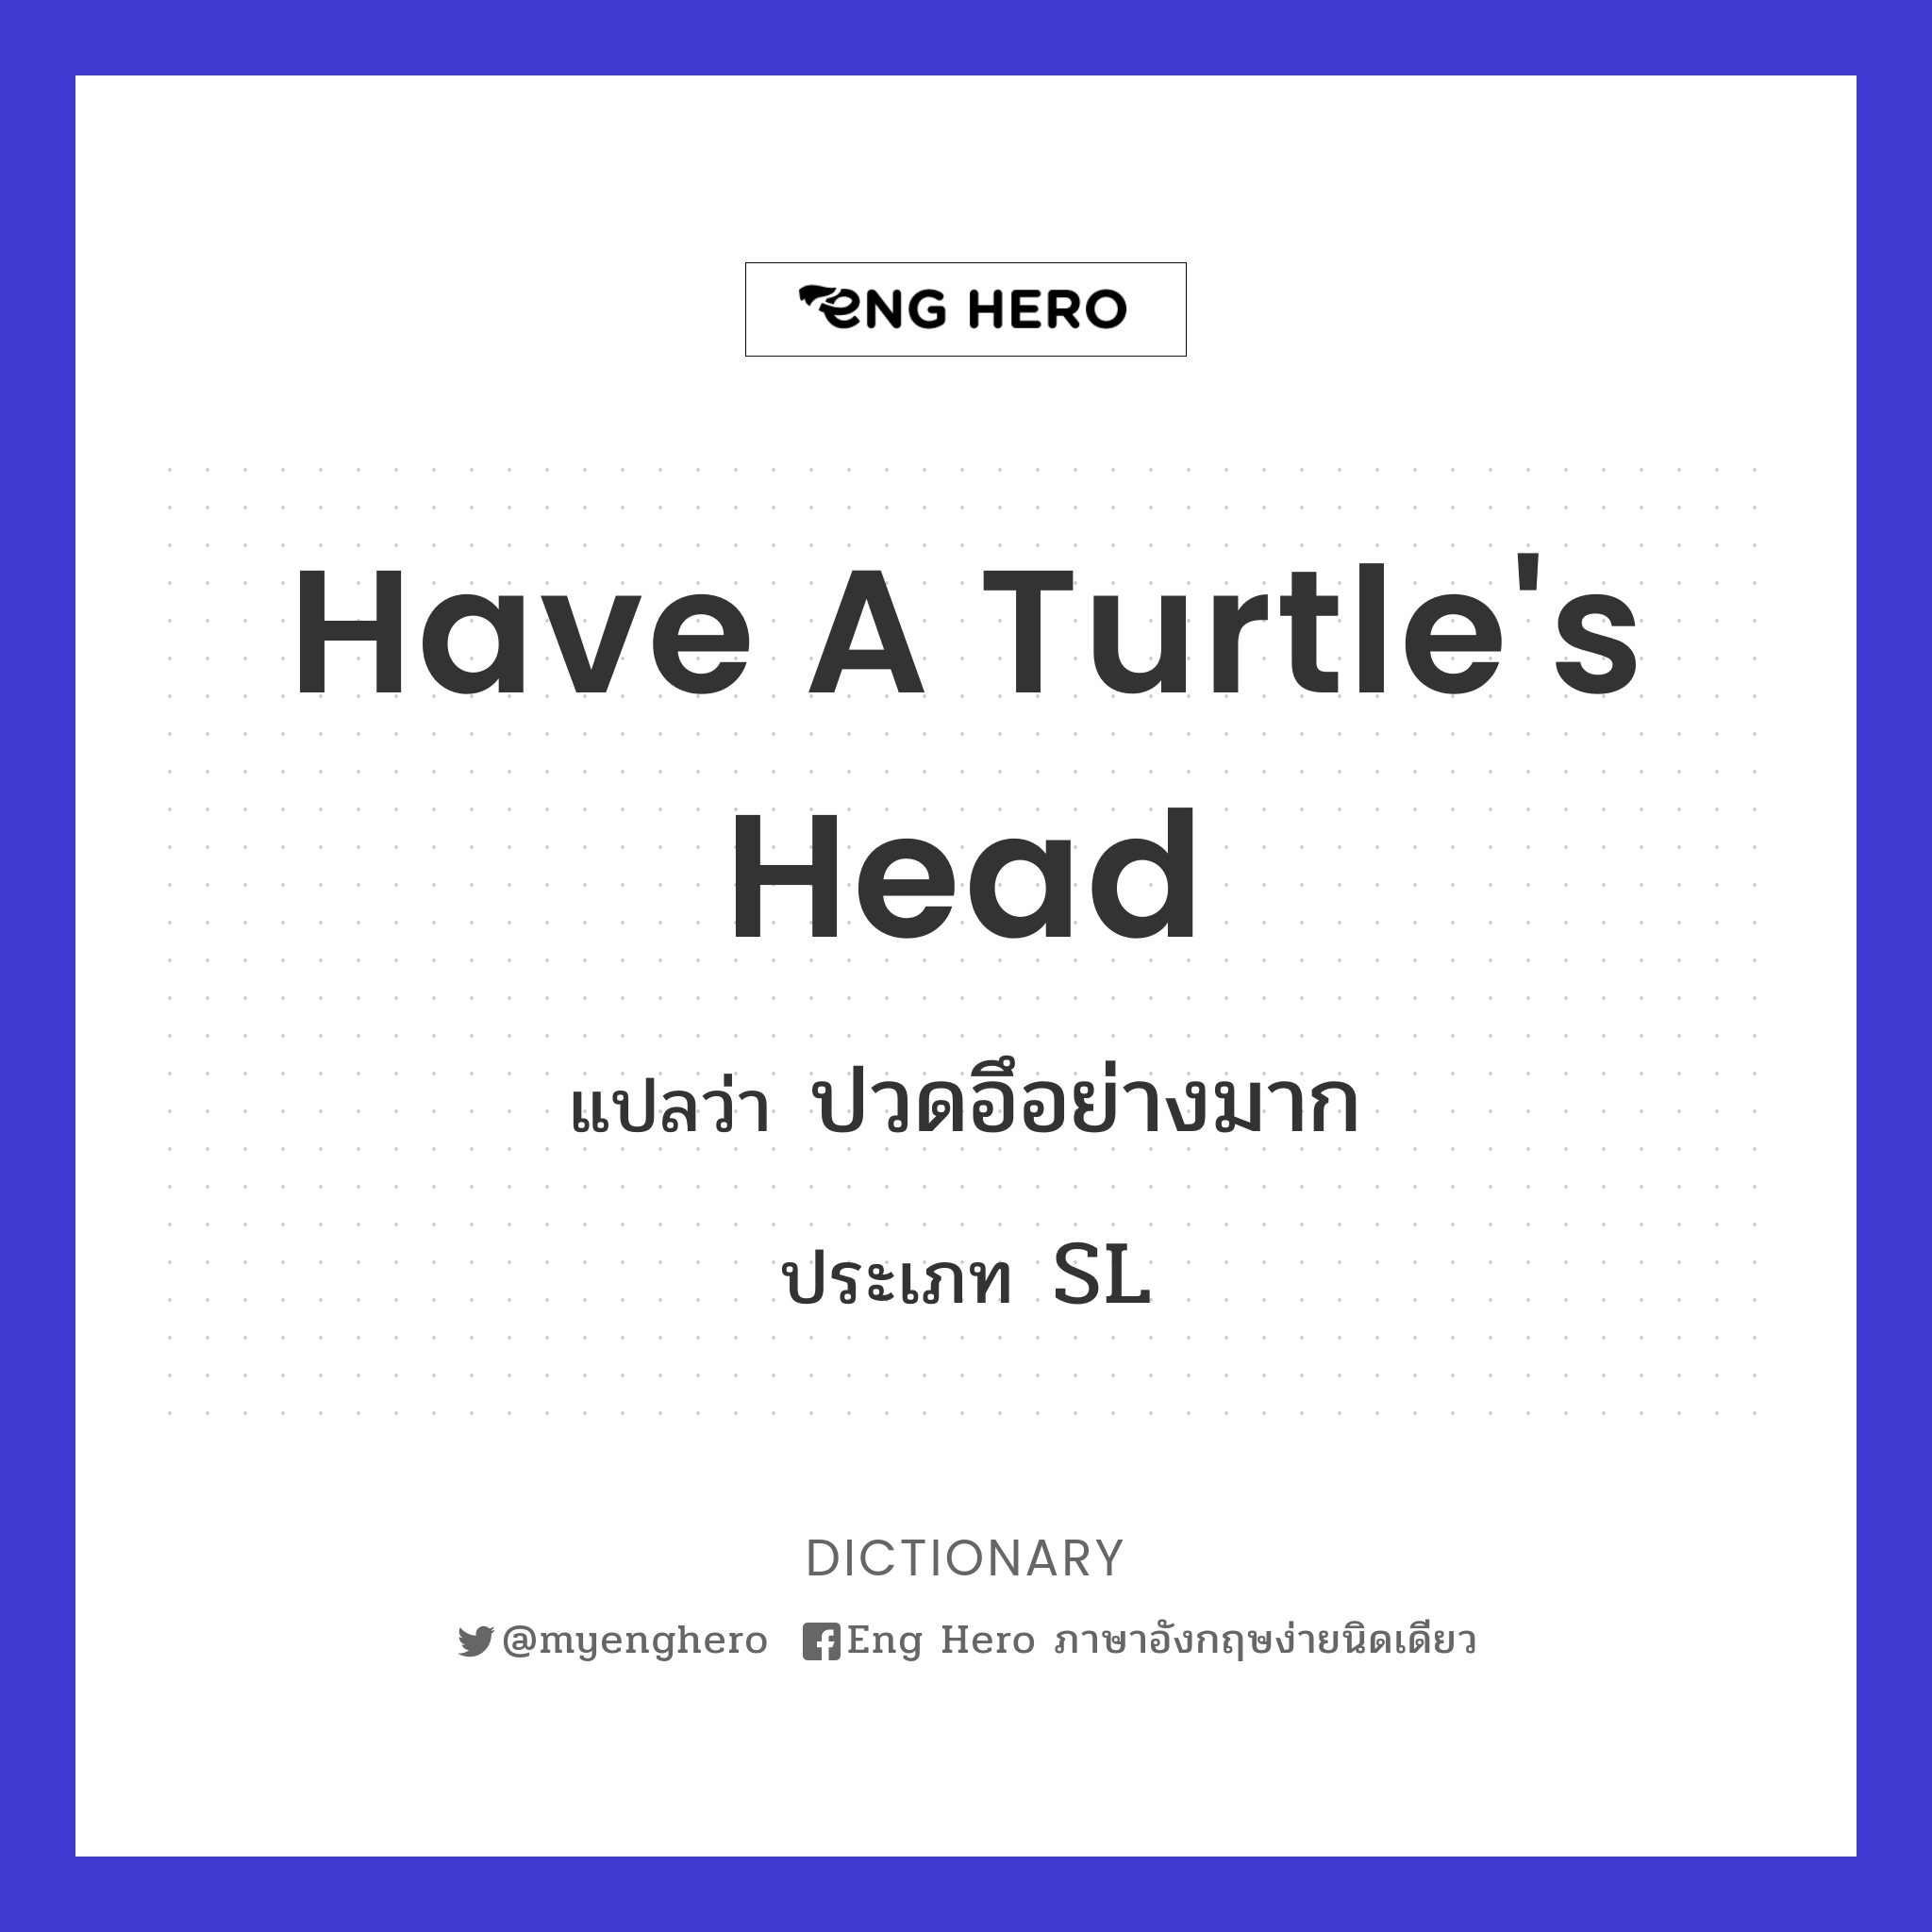 have a turtle's head